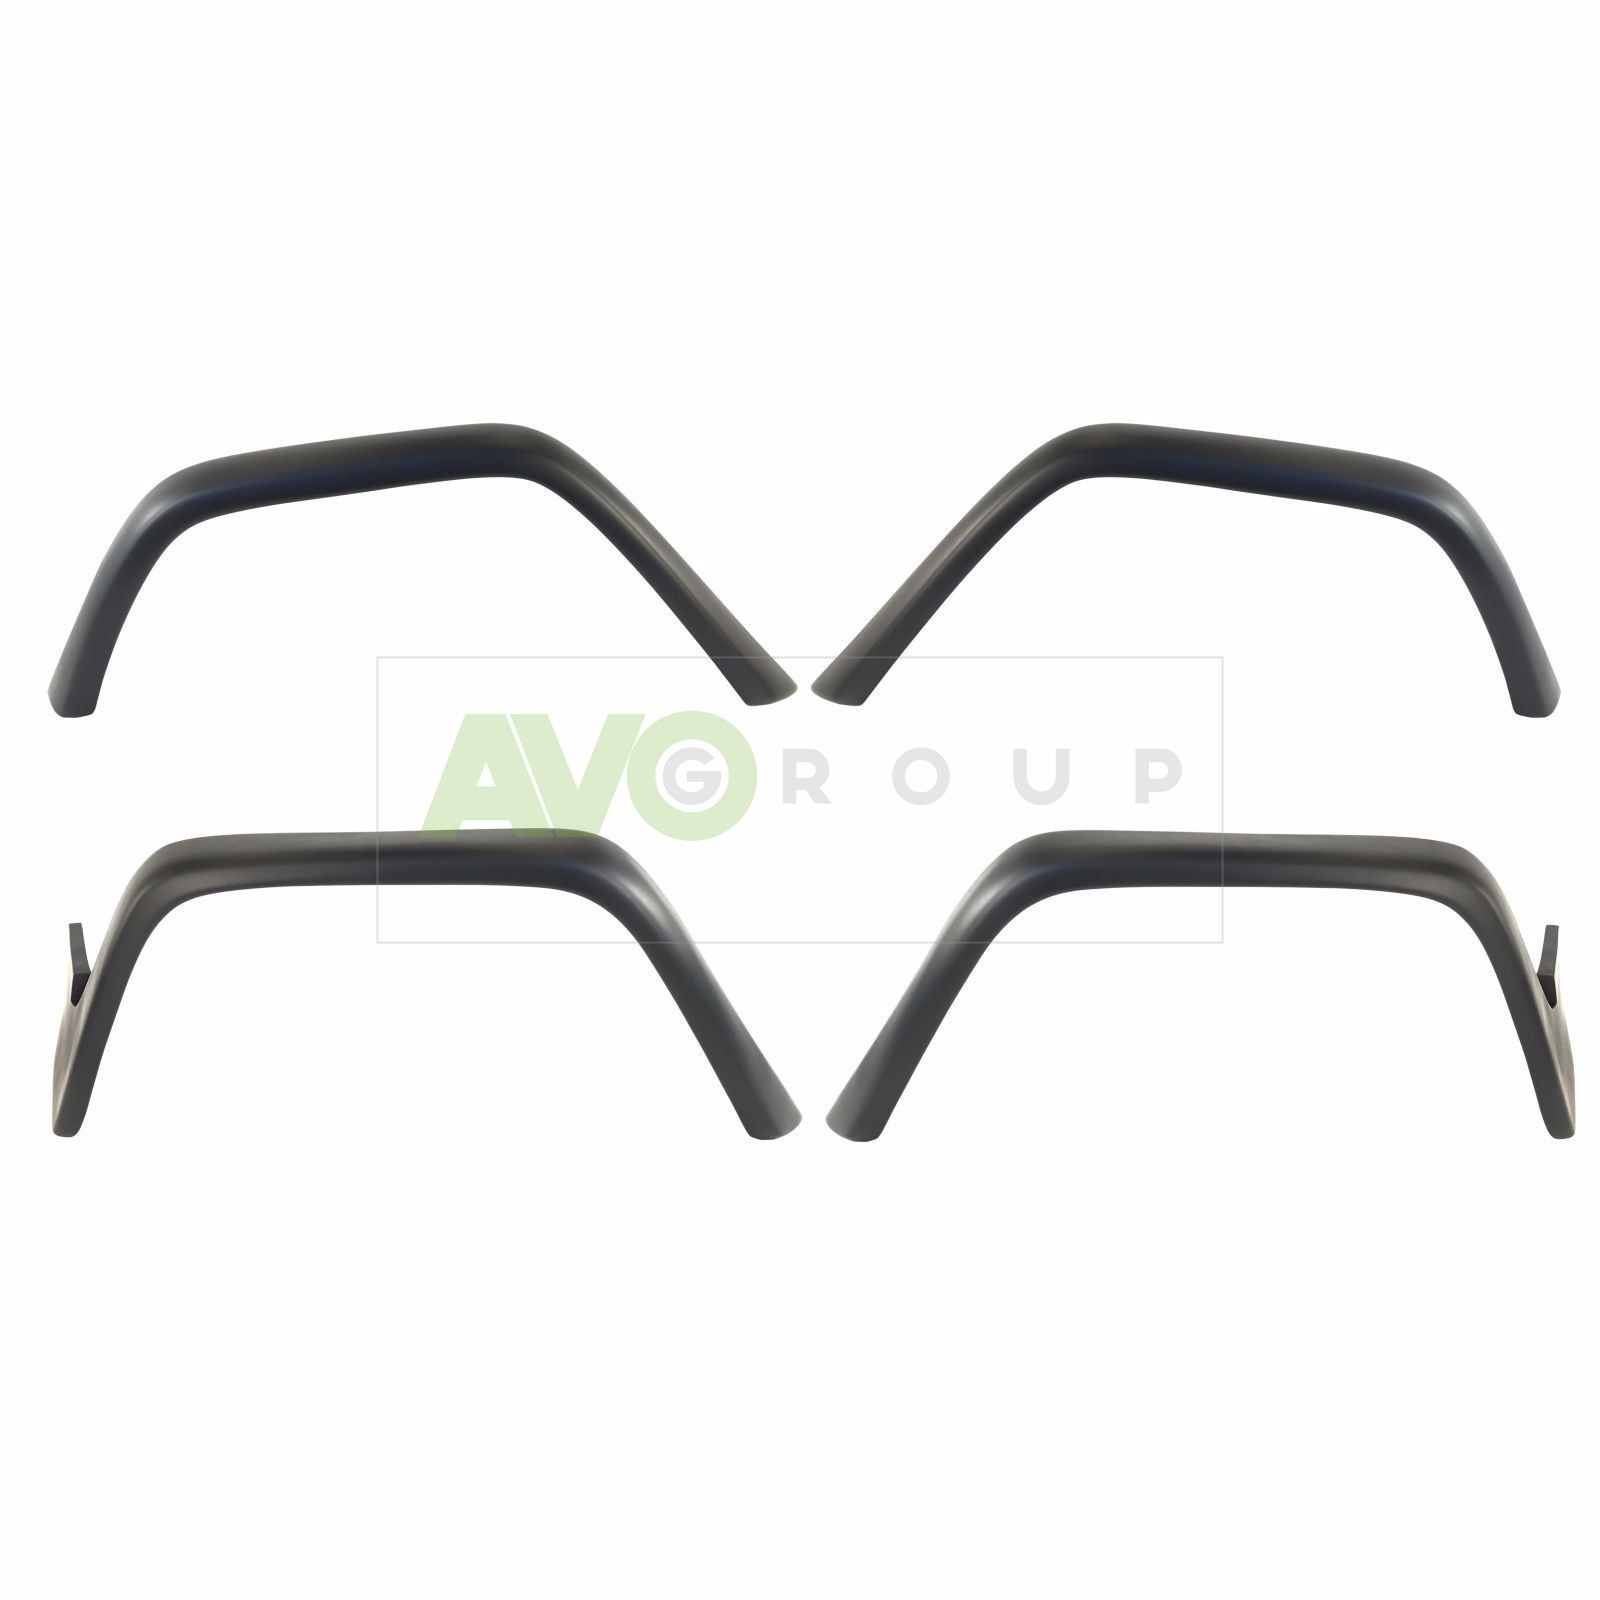 Wheel Arches Fender Flares for MB G Class AMG W463 G500 2002-2014